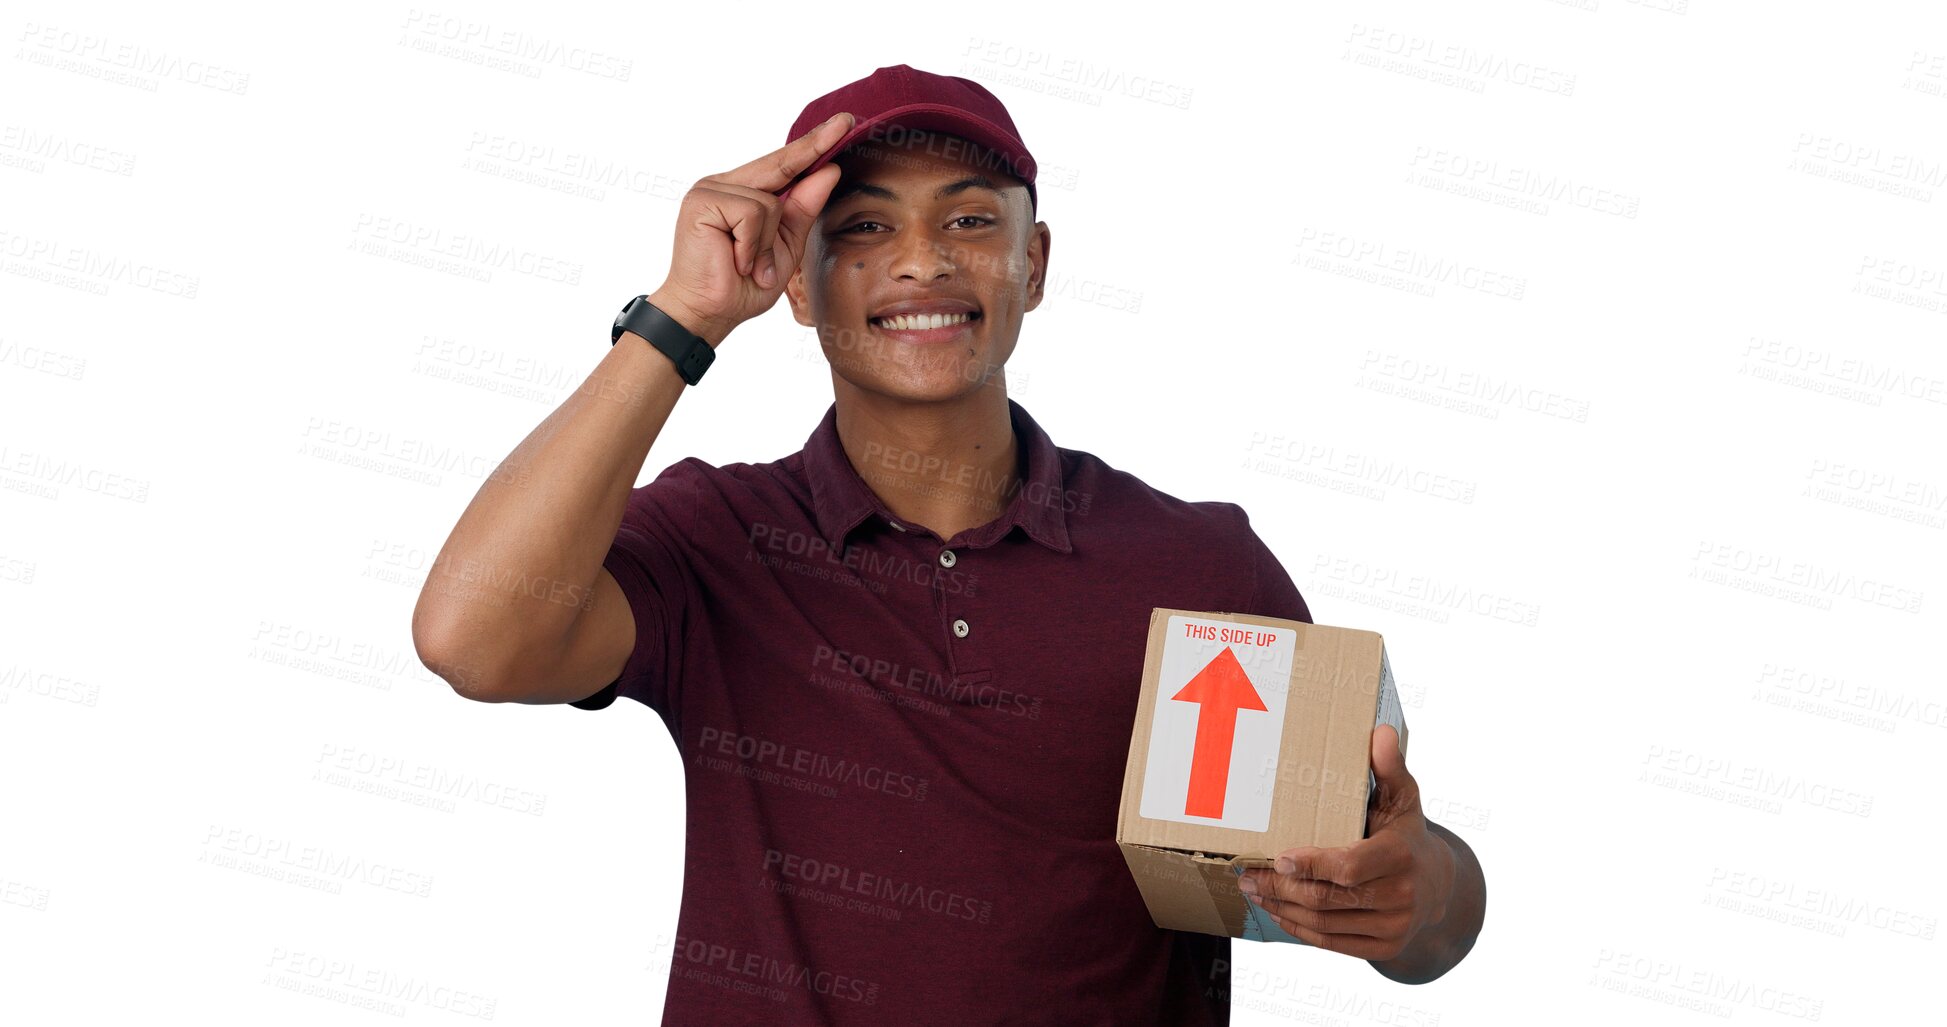 Buy stock photo Portrait, happy man and courier with box, greeting and distribution isolated on a transparent png background for delivery. Smile, shipping or person in cap with package, parcel or cargo for logistics